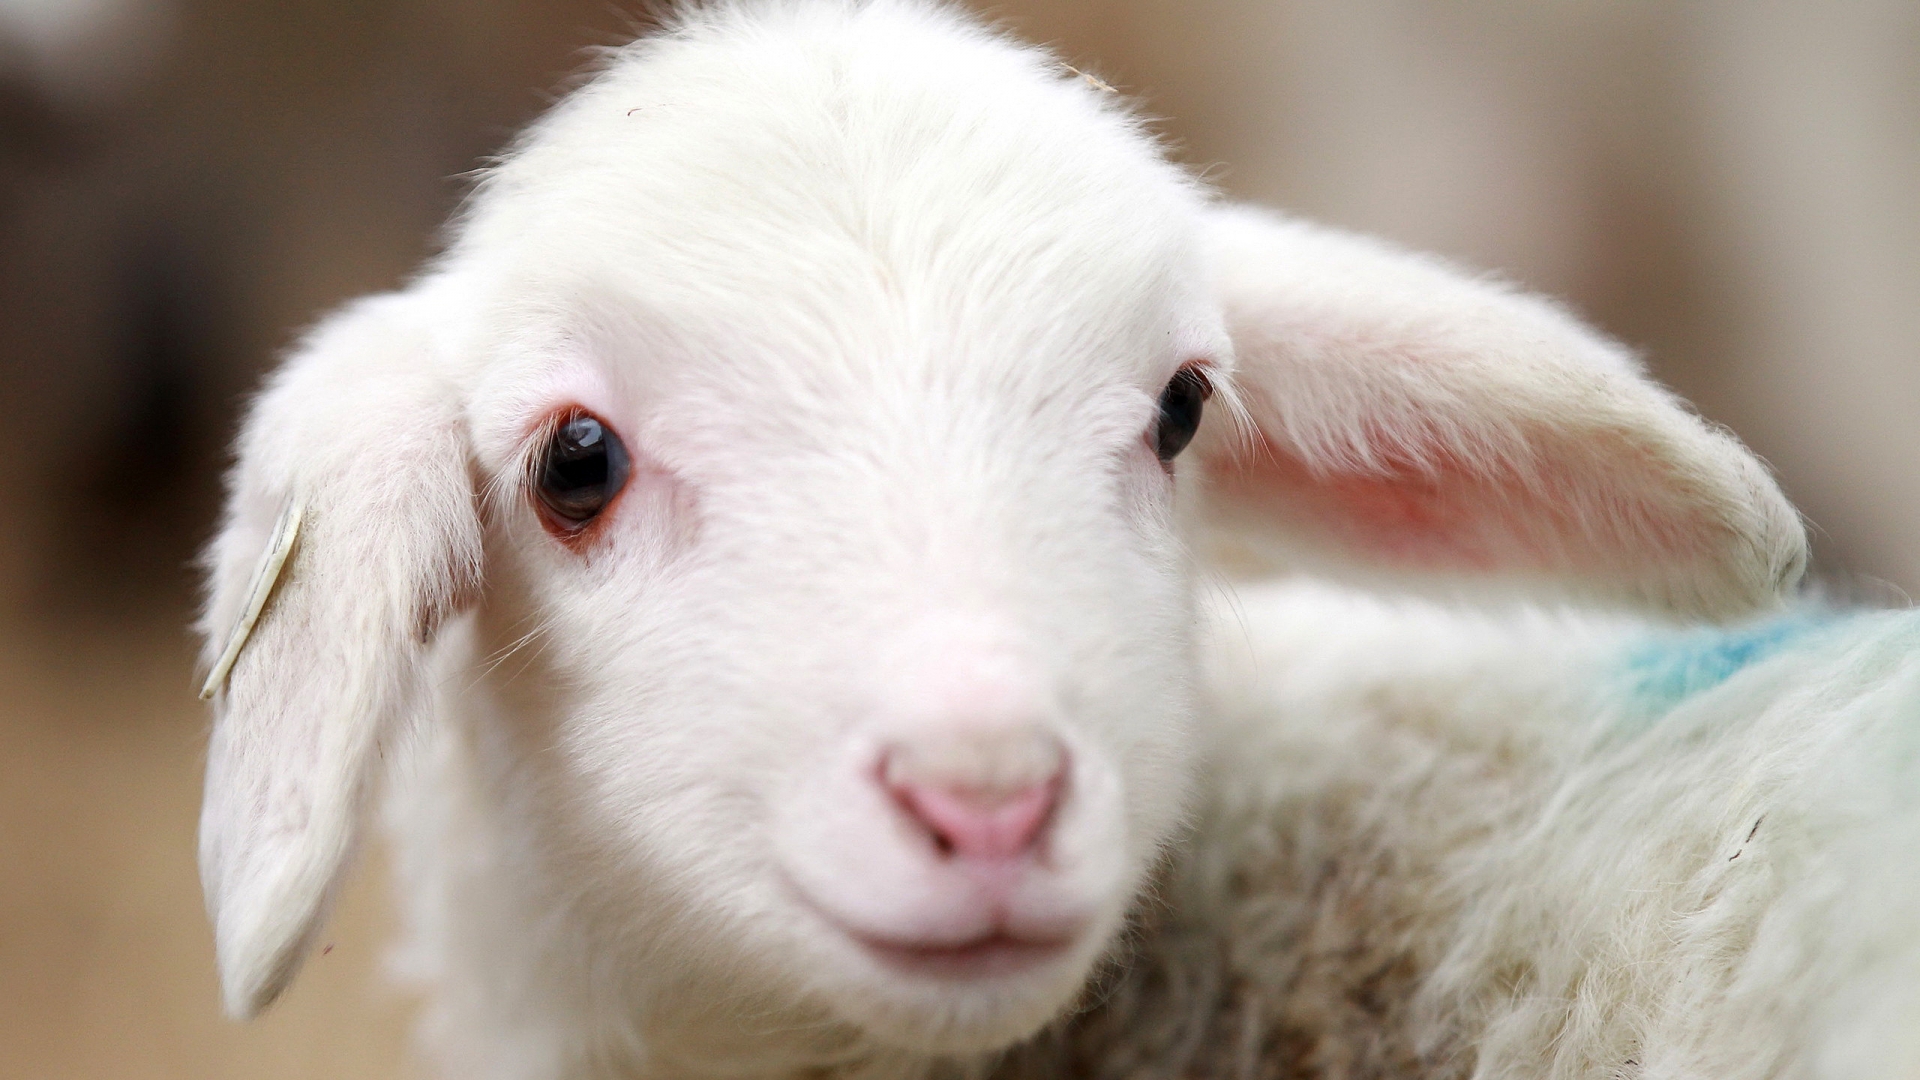 Cute Lamb for 1920 x 1080 HDTV 1080p resolution